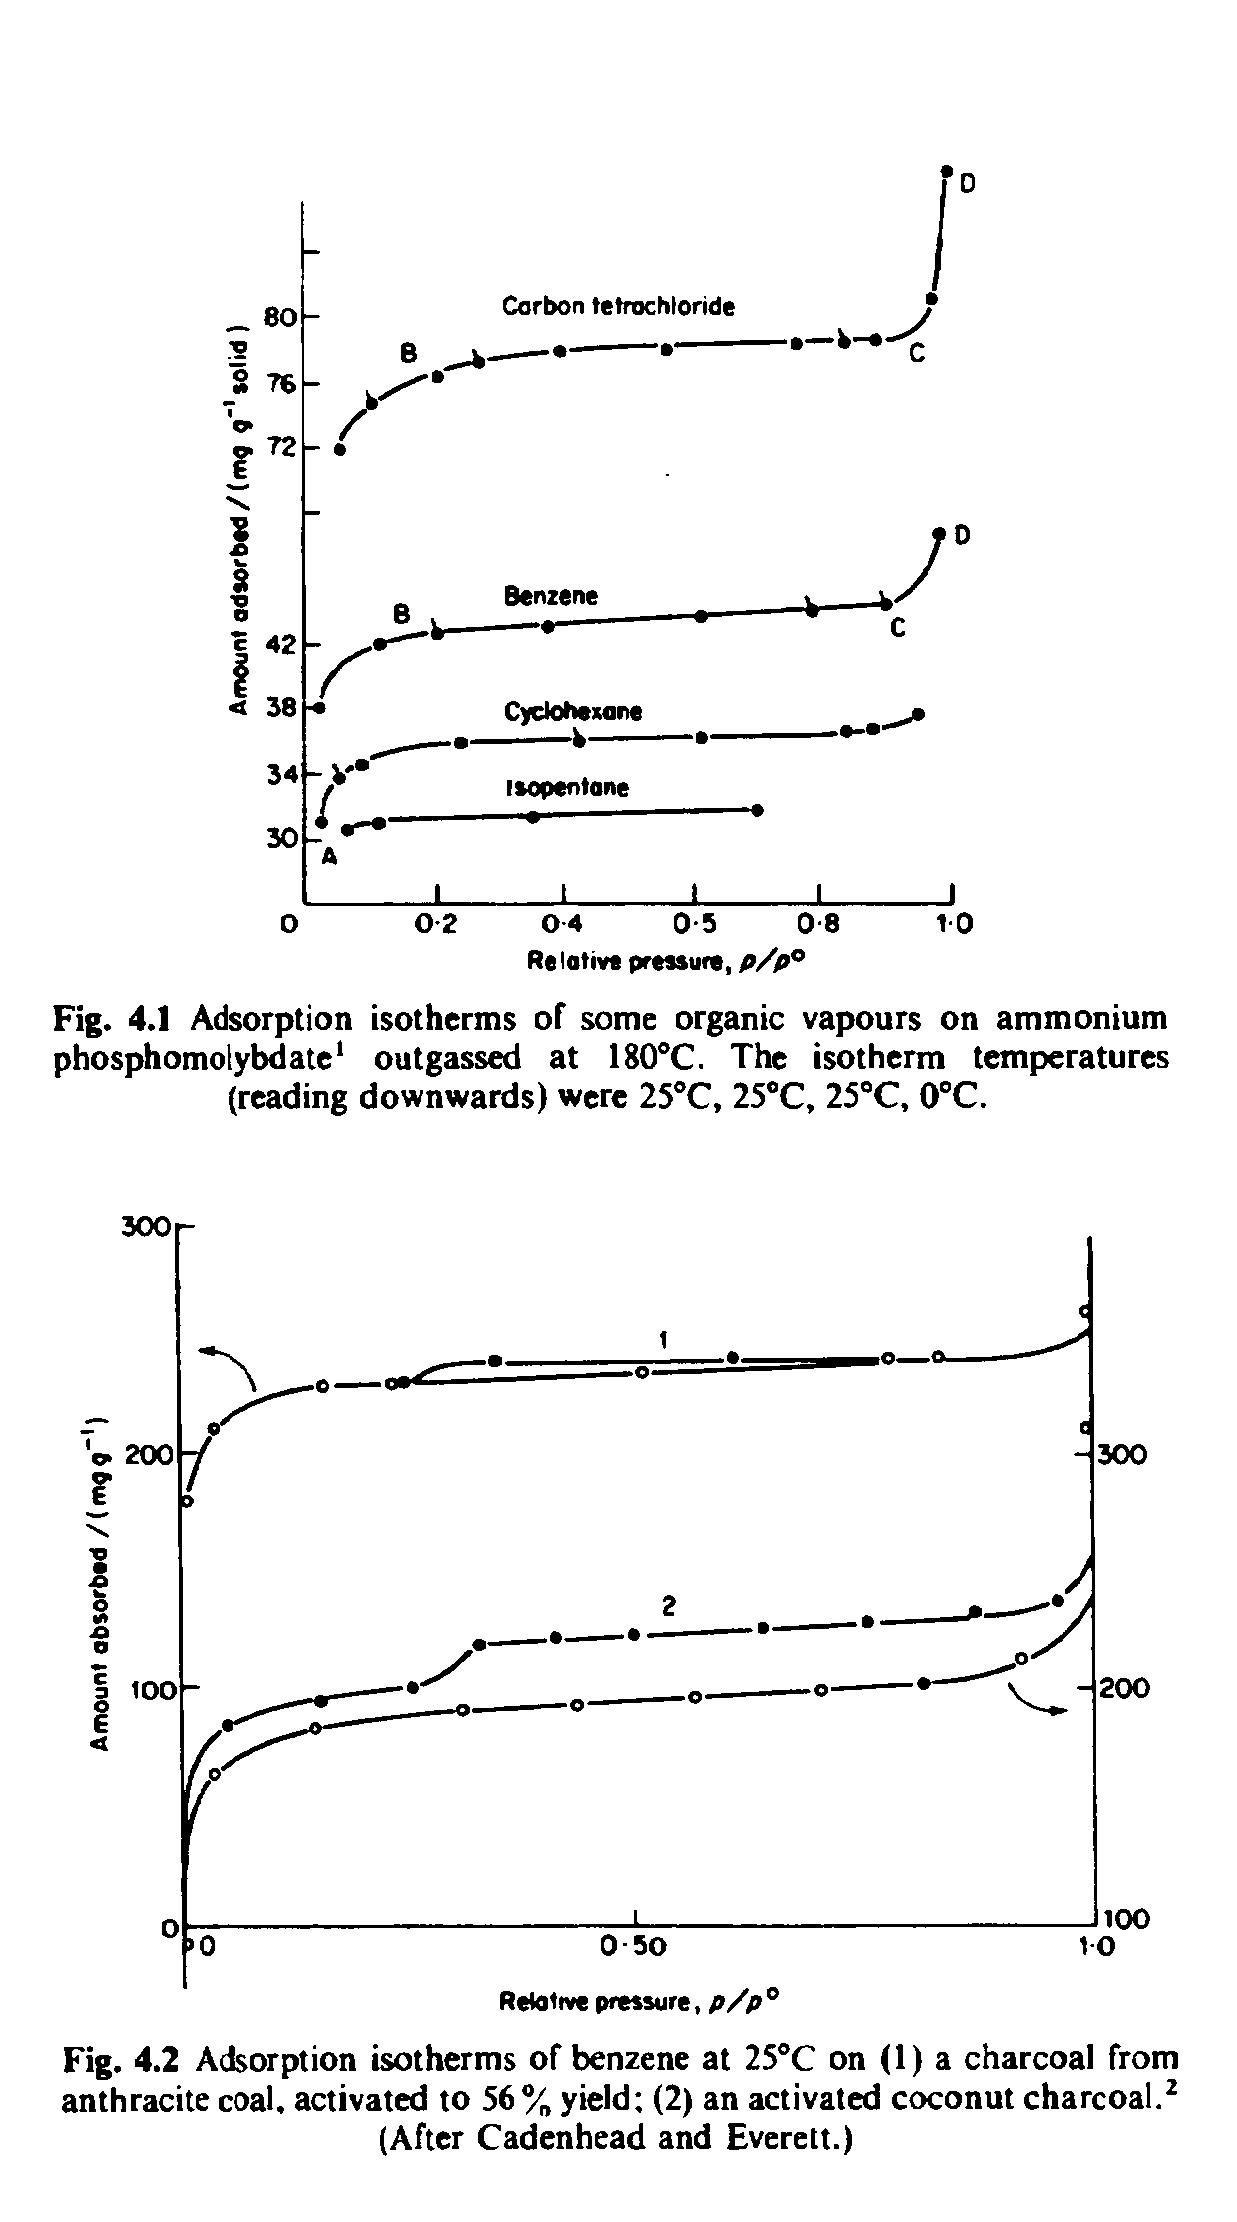 Fig. 4.2 Adsorption isotherms of benzene at 25°C on (1) a charcoal from anthracite coal, activated to 56% yield (2) an activated coconut charcoal. (After Cadenhead and Everett.)...